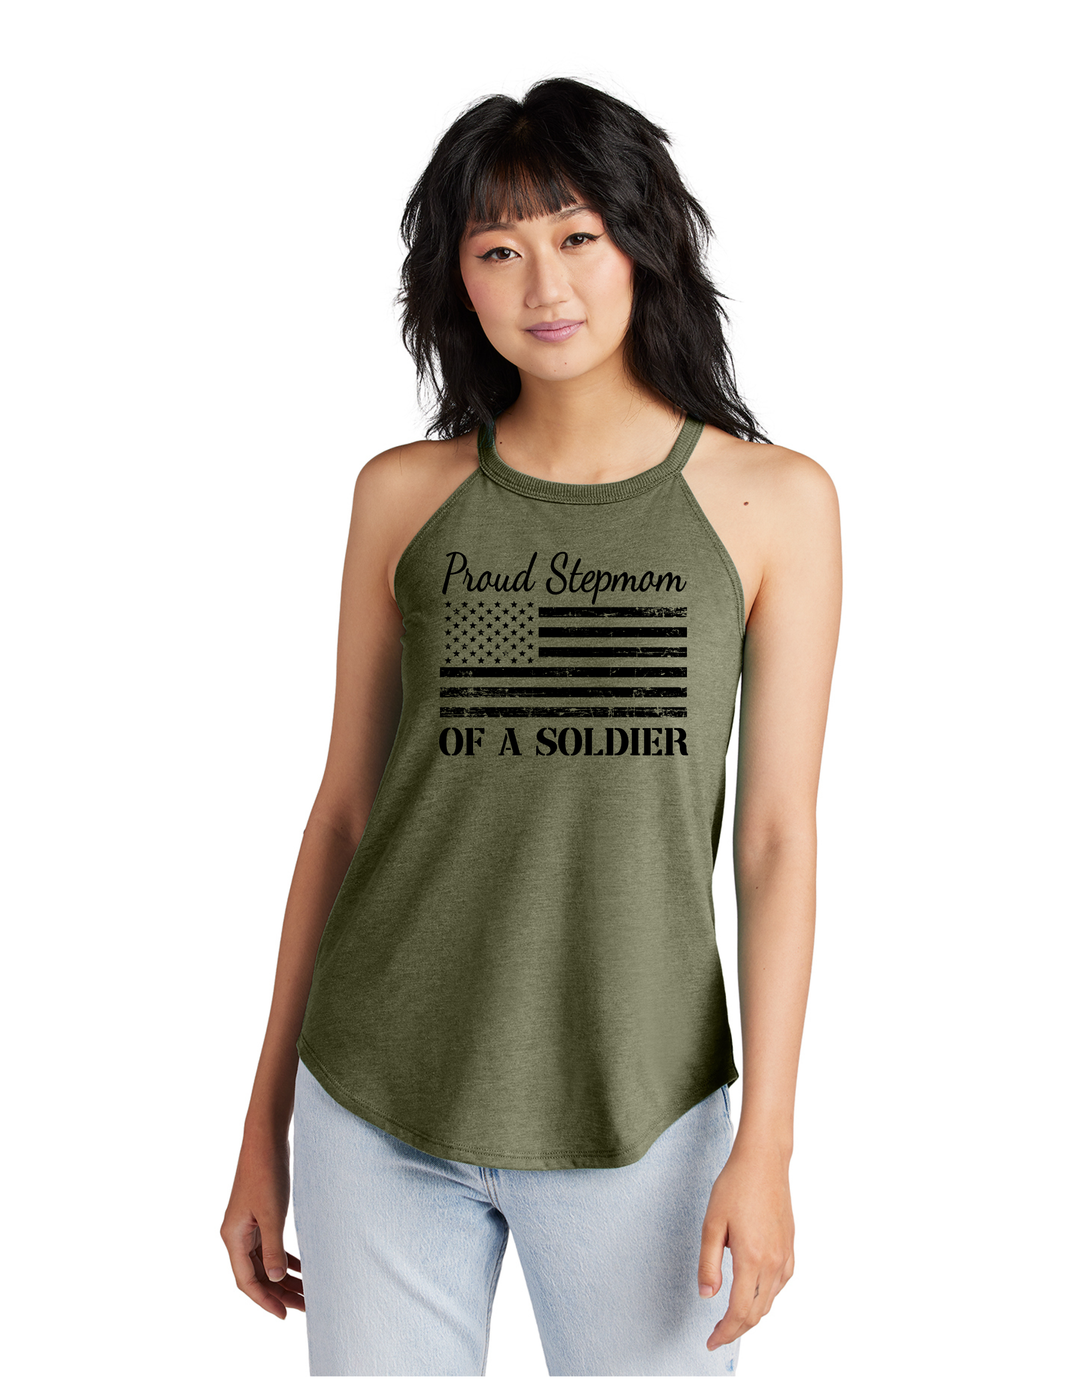 Proud Stepmom of a Soldier Tank (Green)